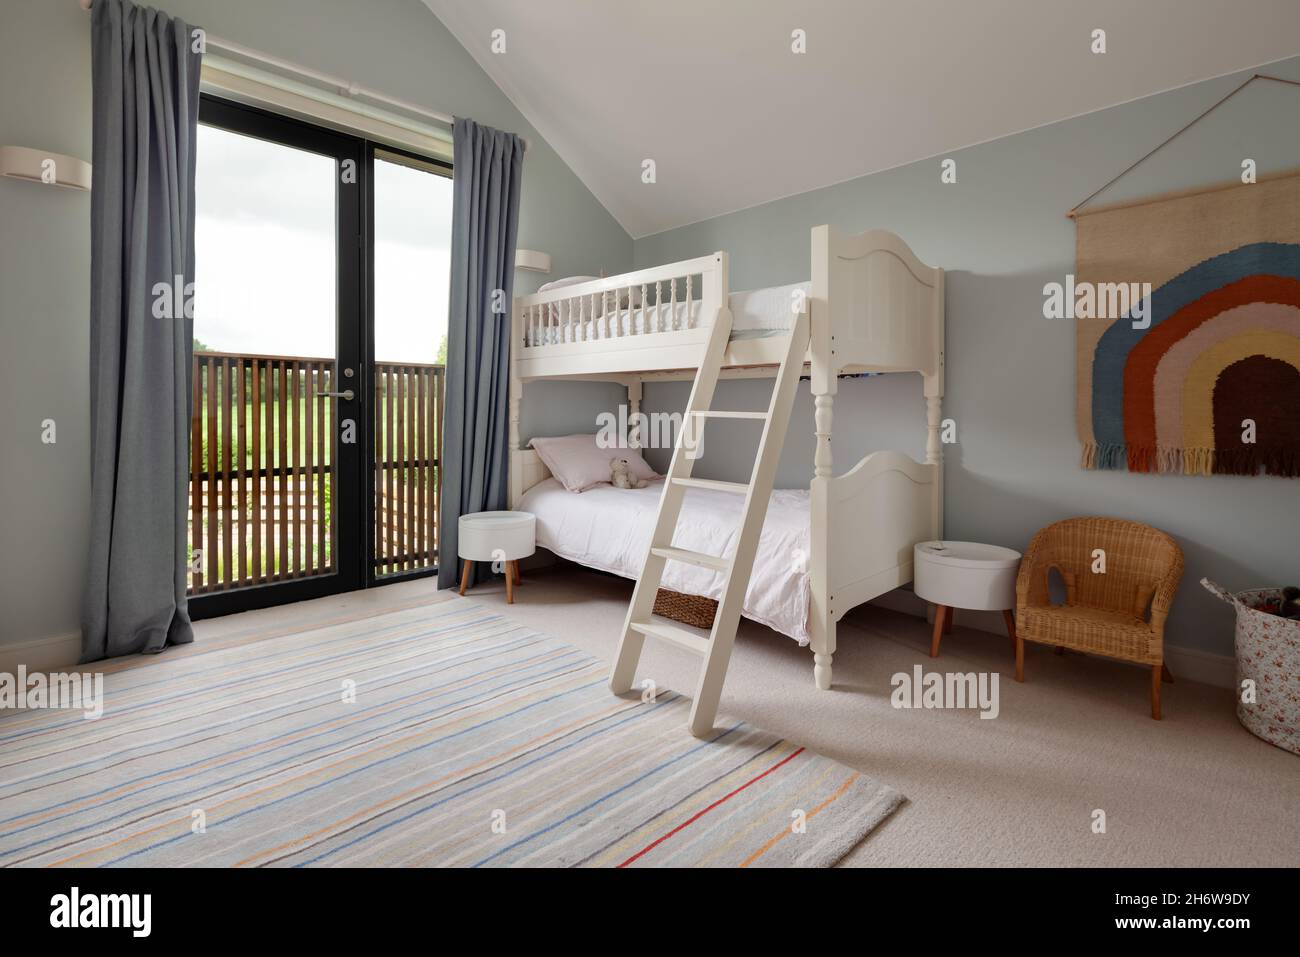 Dry Drayton, England - August 2 2019: Childs bedroom space with bunk bed including ladder decorated in blue and white Stock Photo